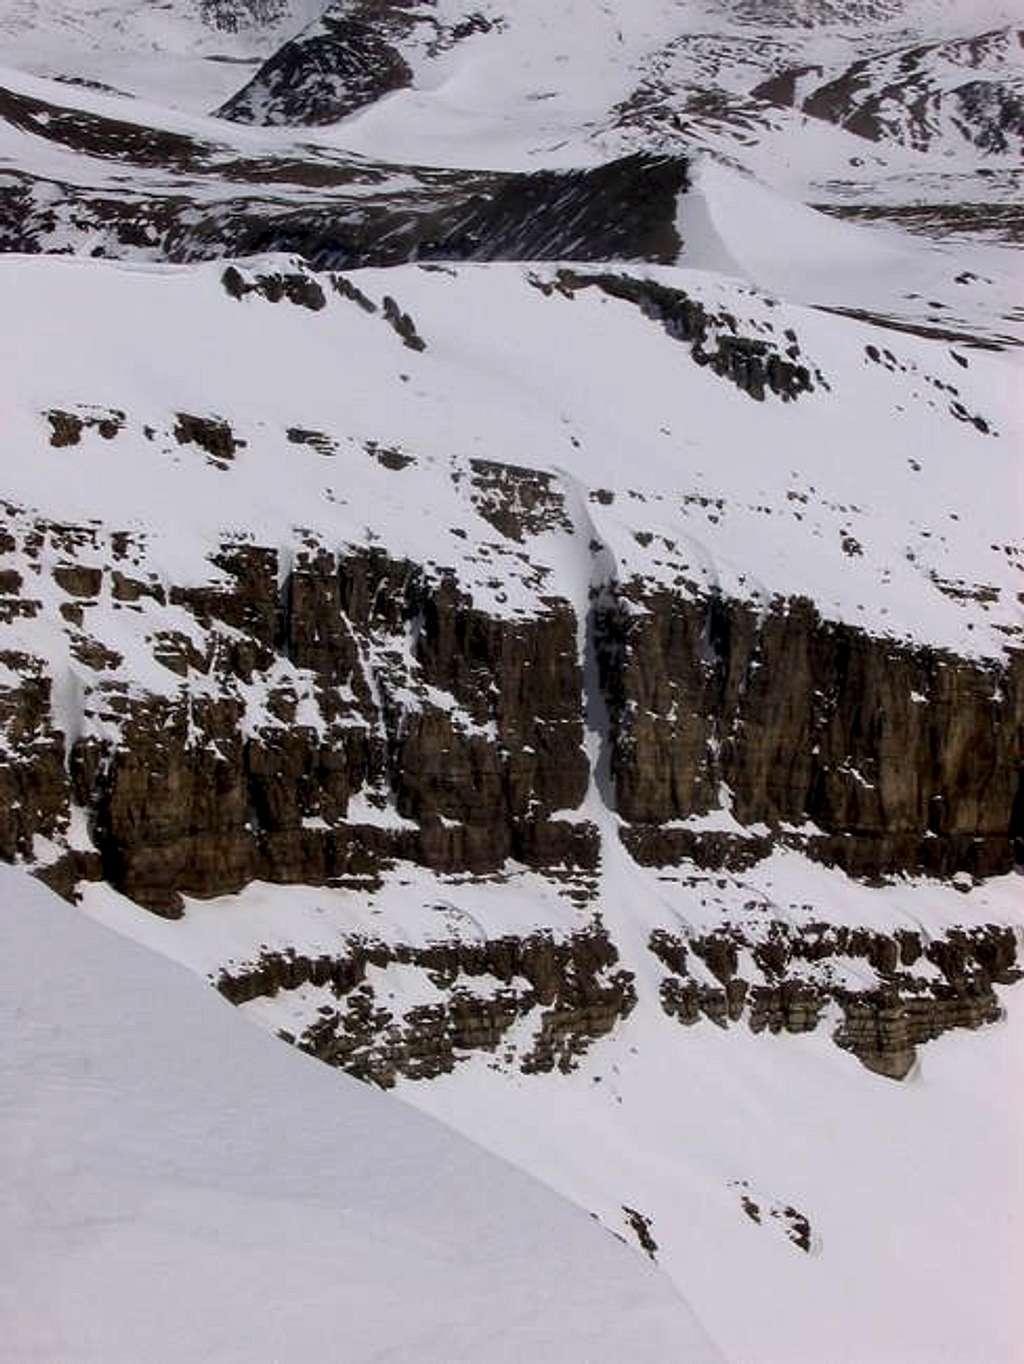 A close-up of the couloir...